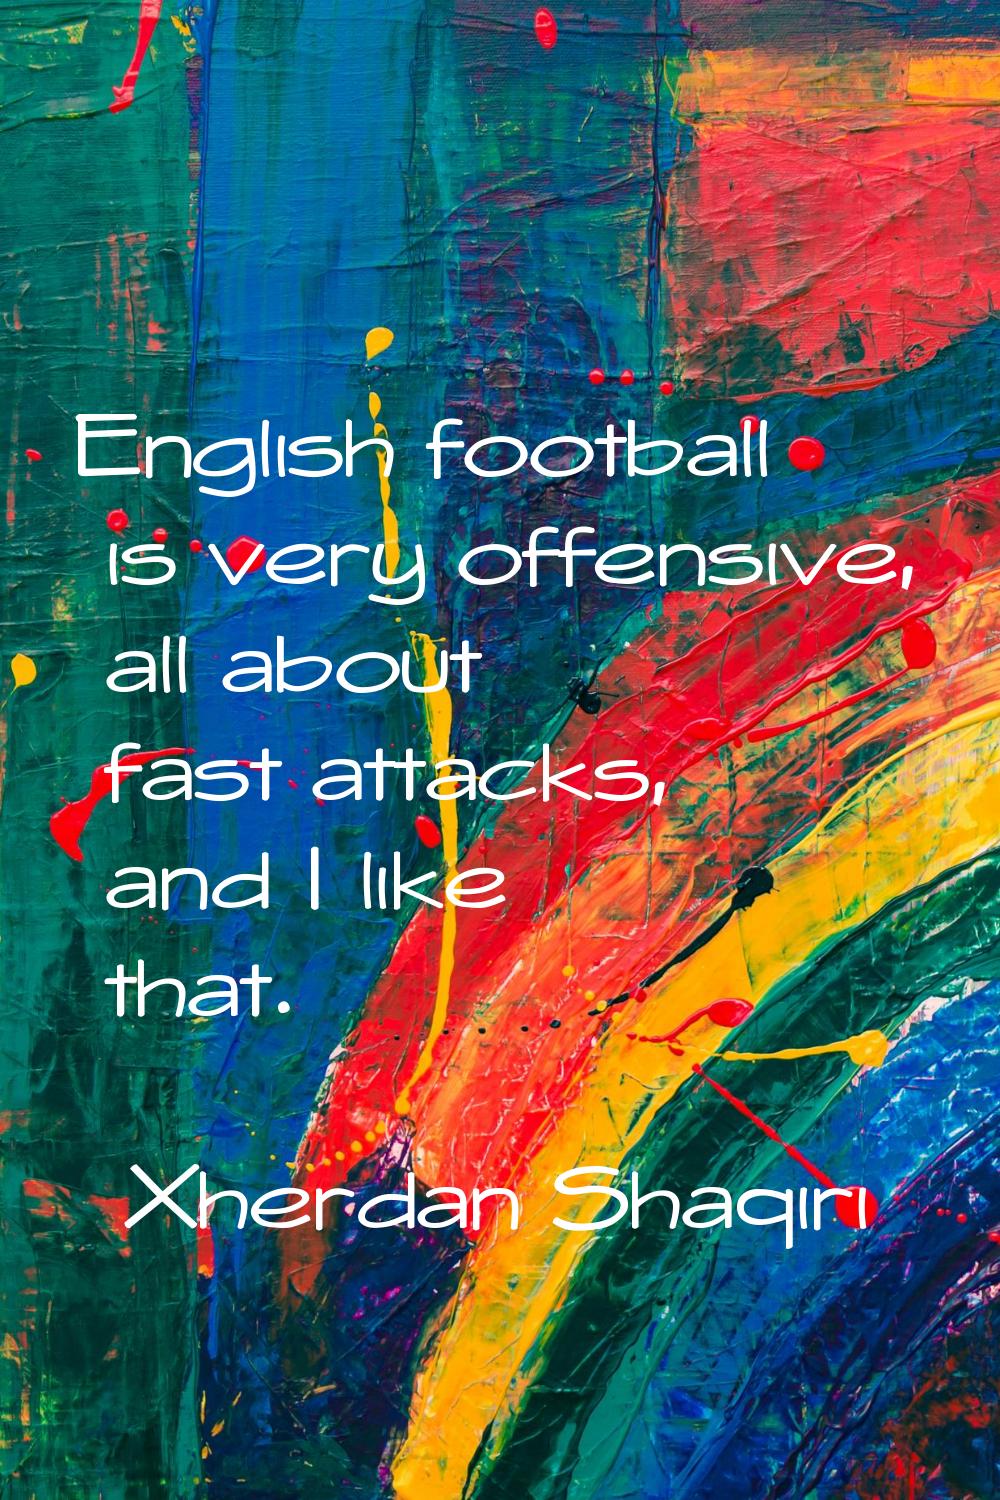 English football is very offensive, all about fast attacks, and I like that.